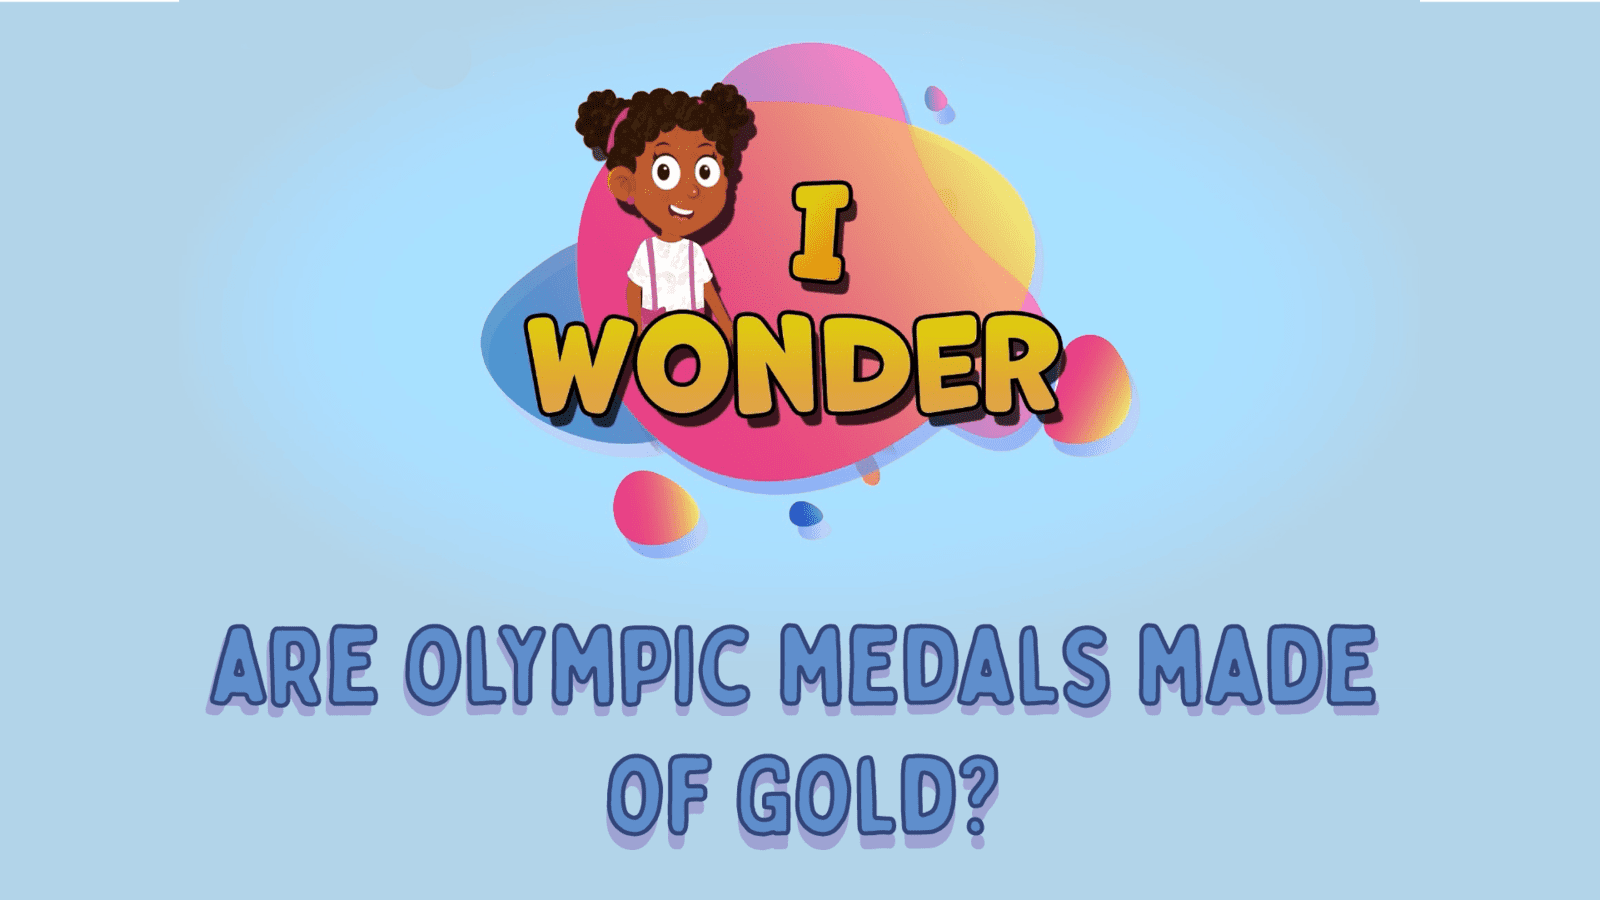 Are The Olympic Medals Made Of Gold?